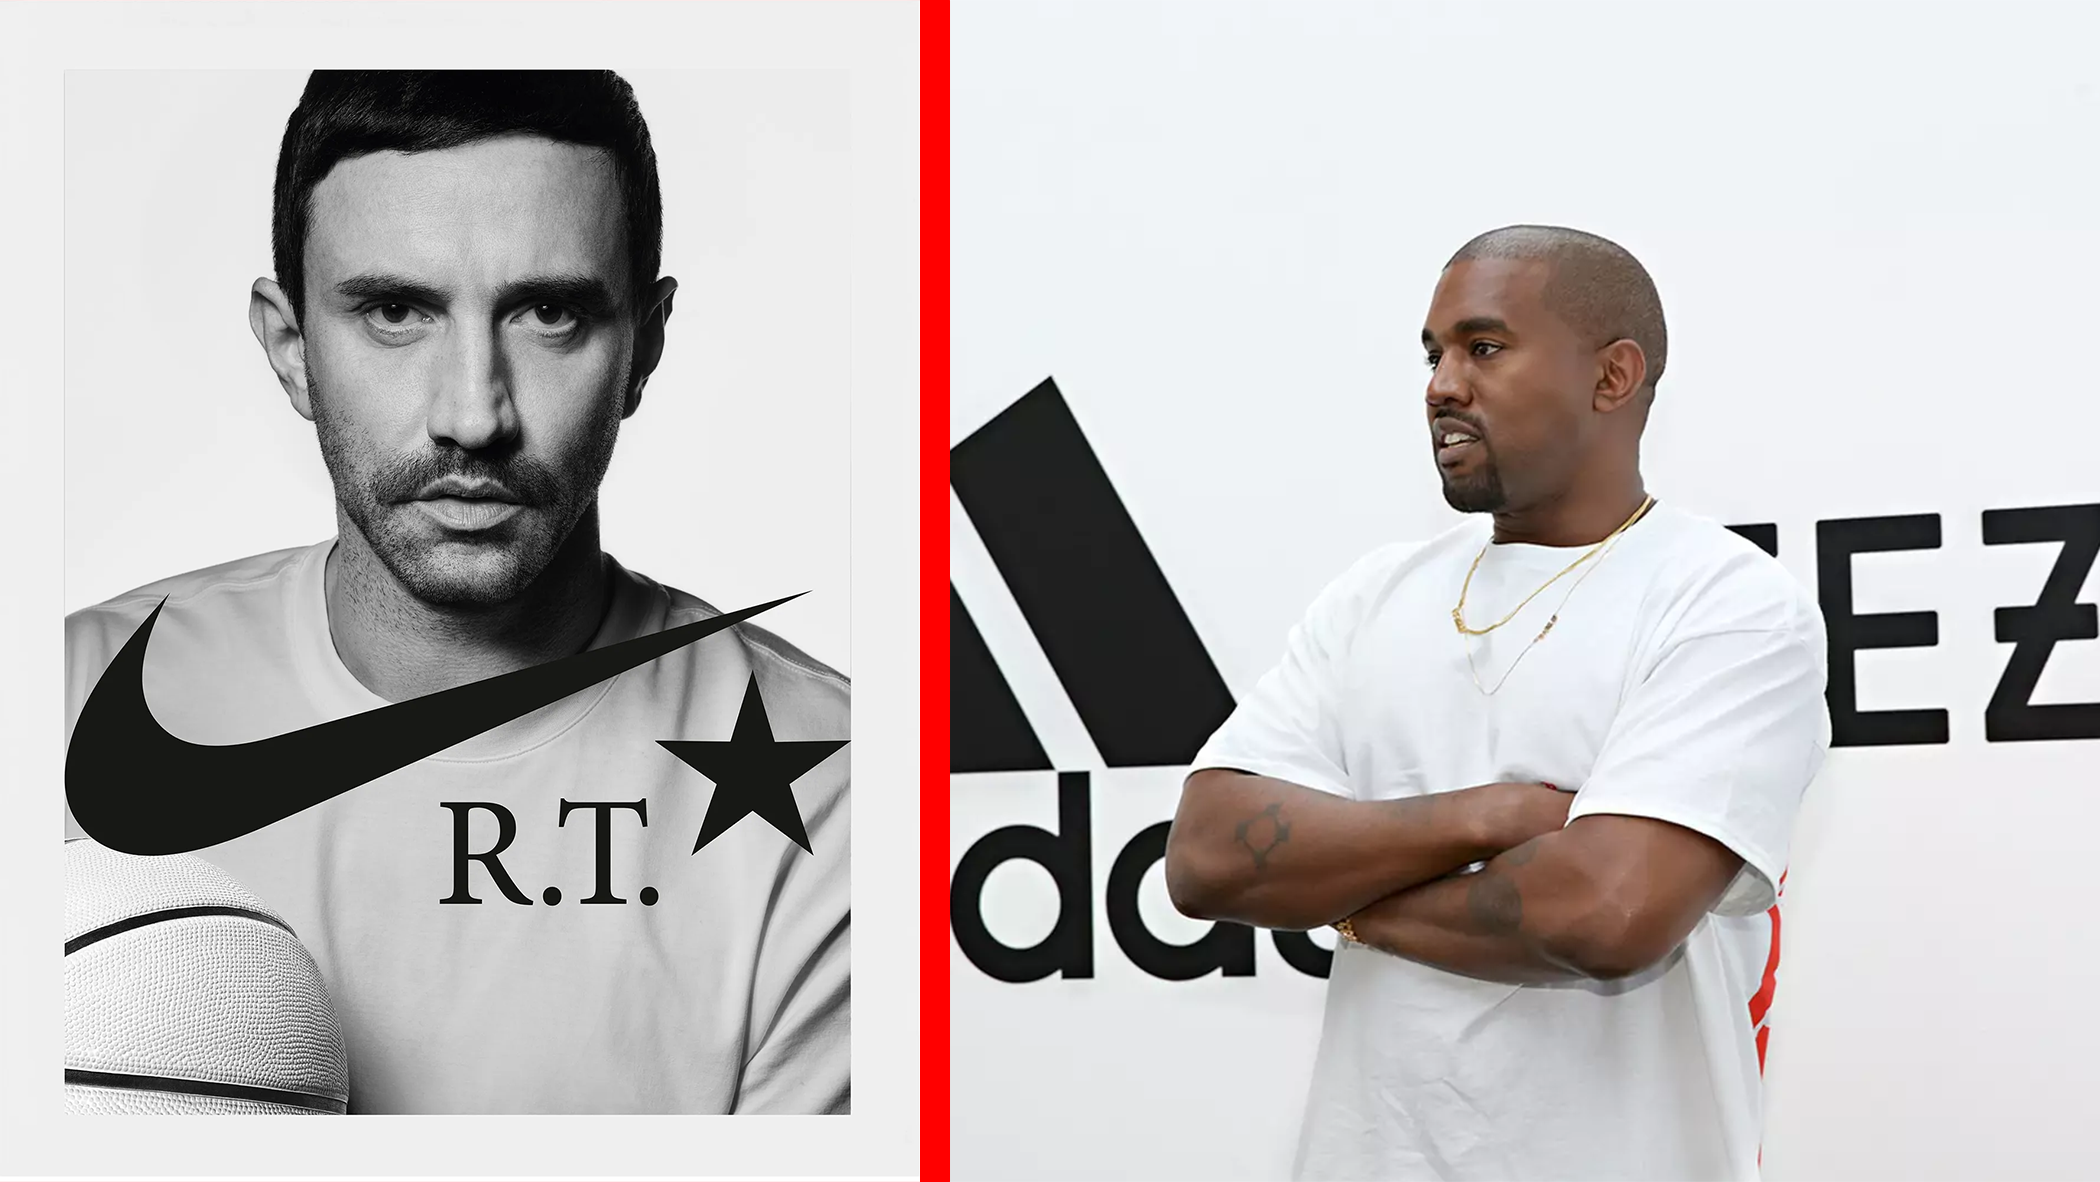 The Battle of Collaborations: Nike vs adidas